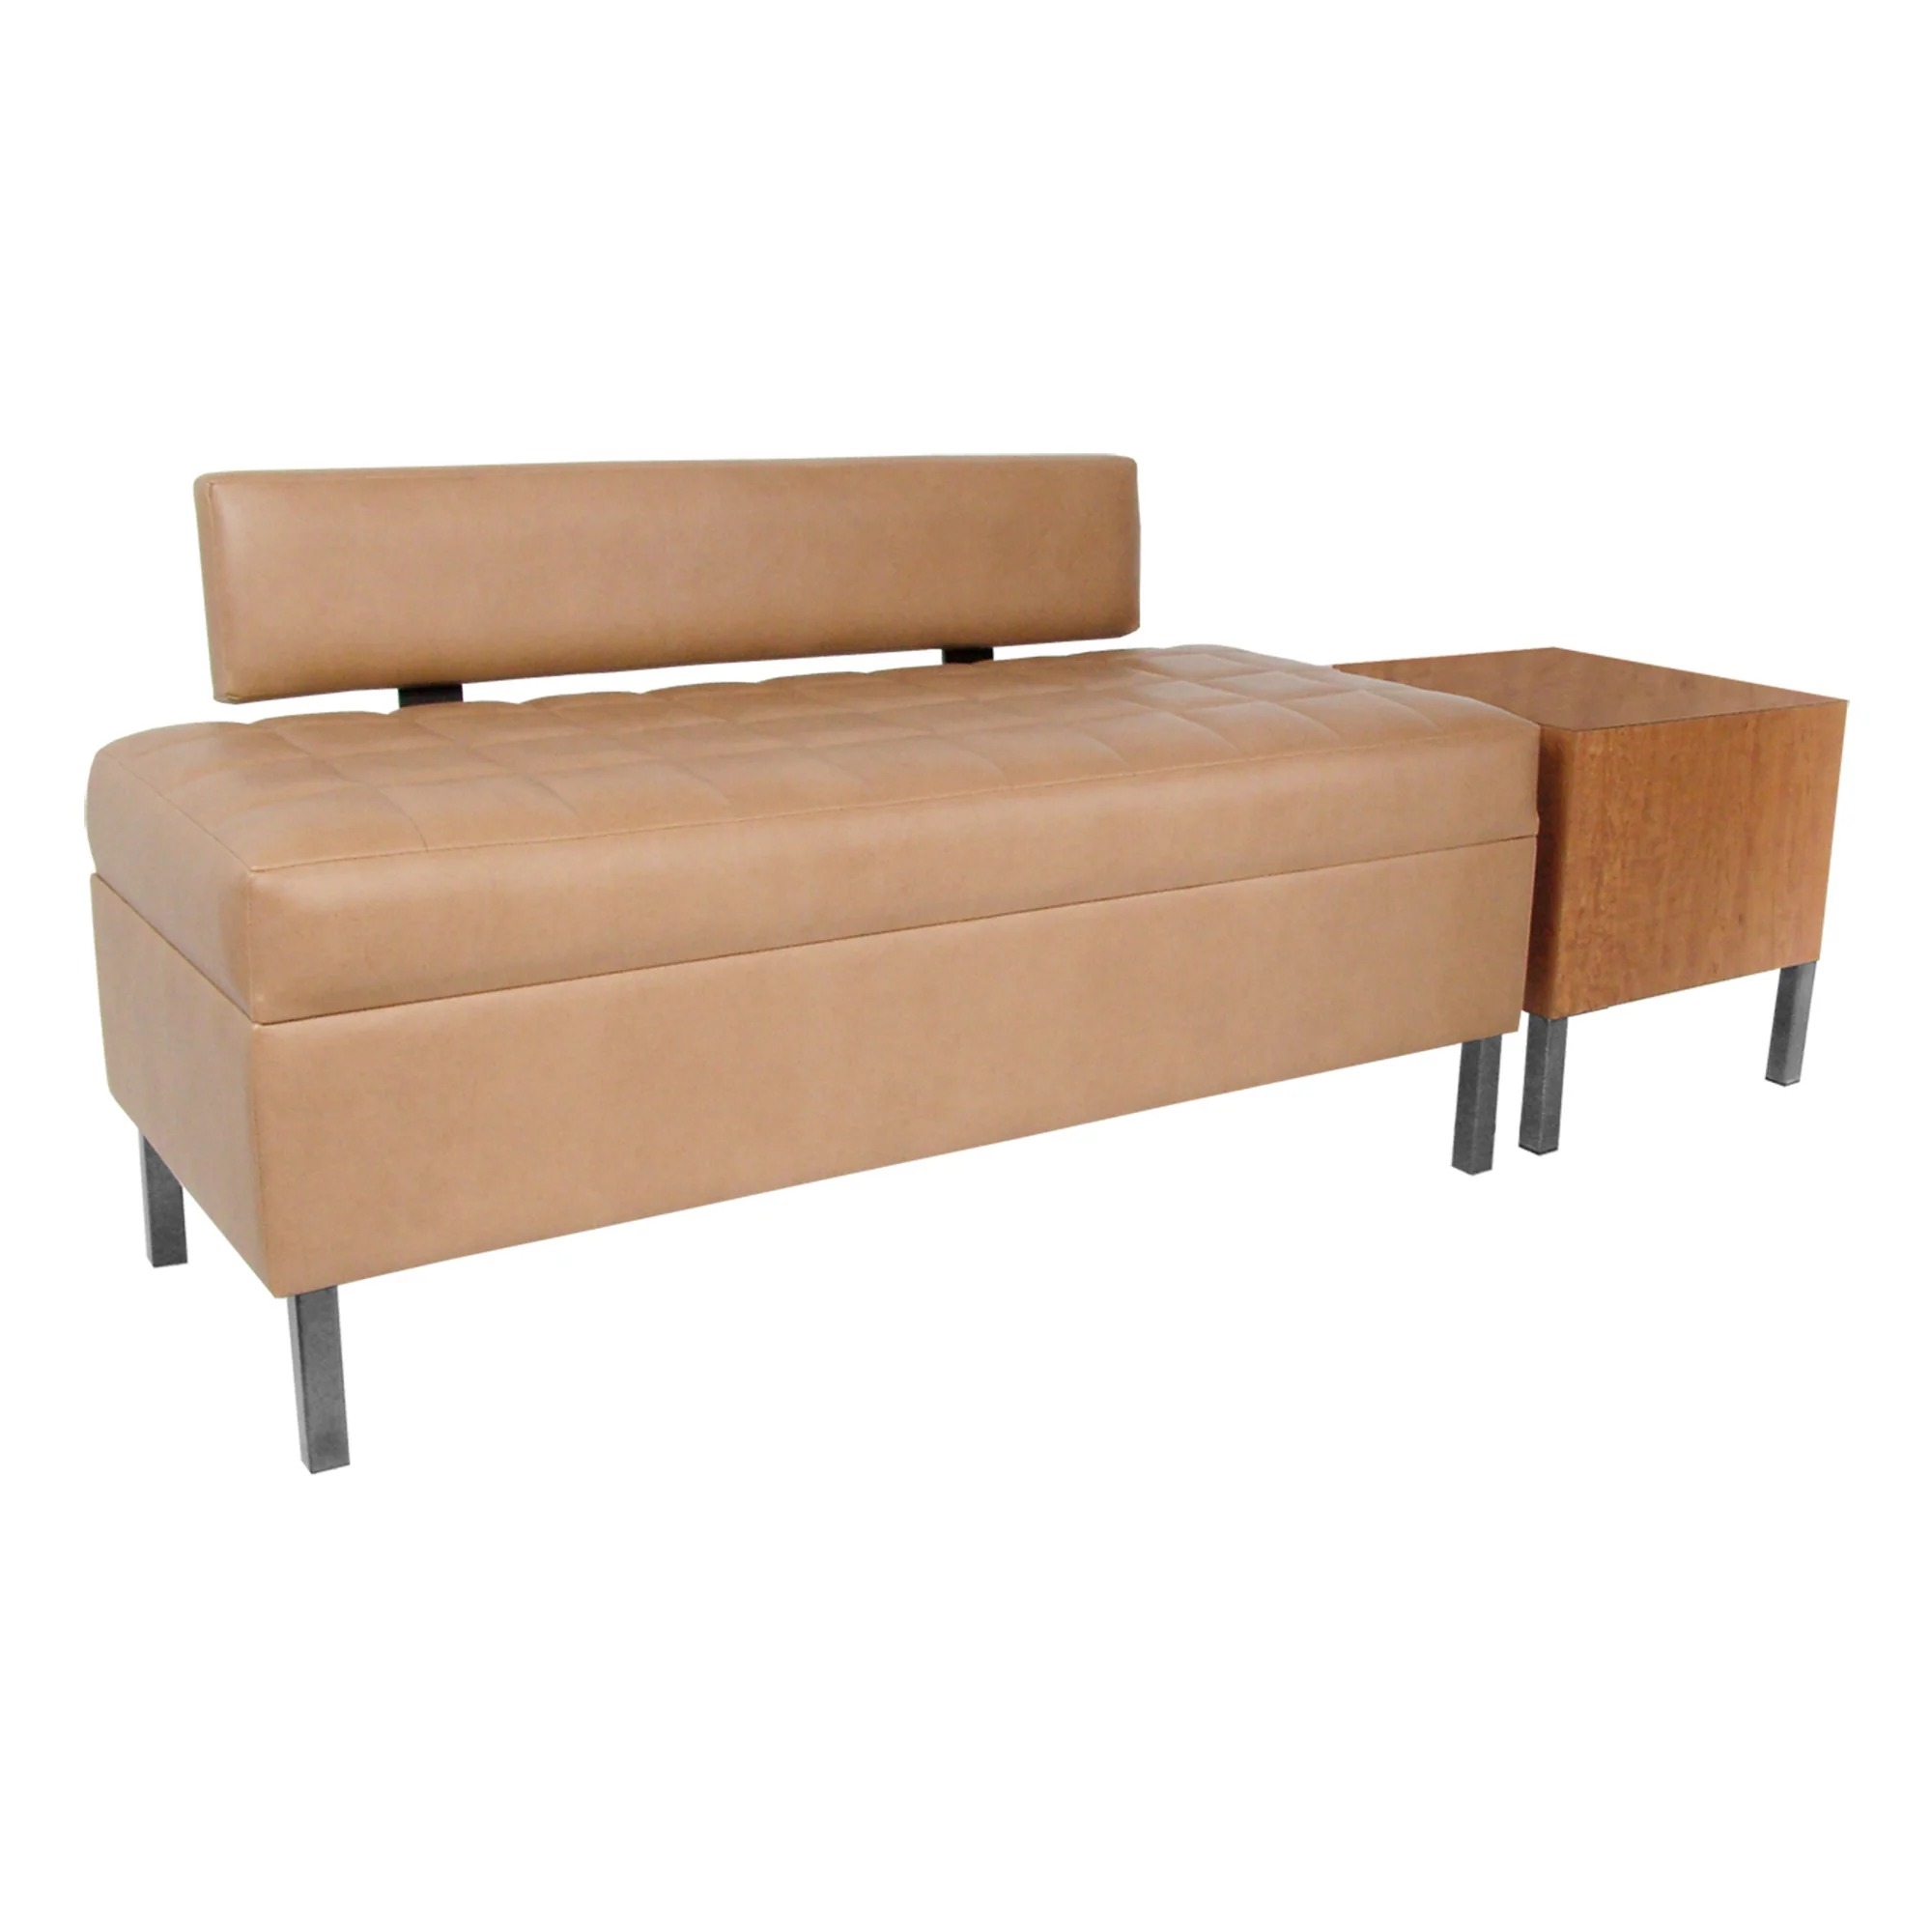 Collins Enova Reception Bench with Lumbar Support - COL-955-50